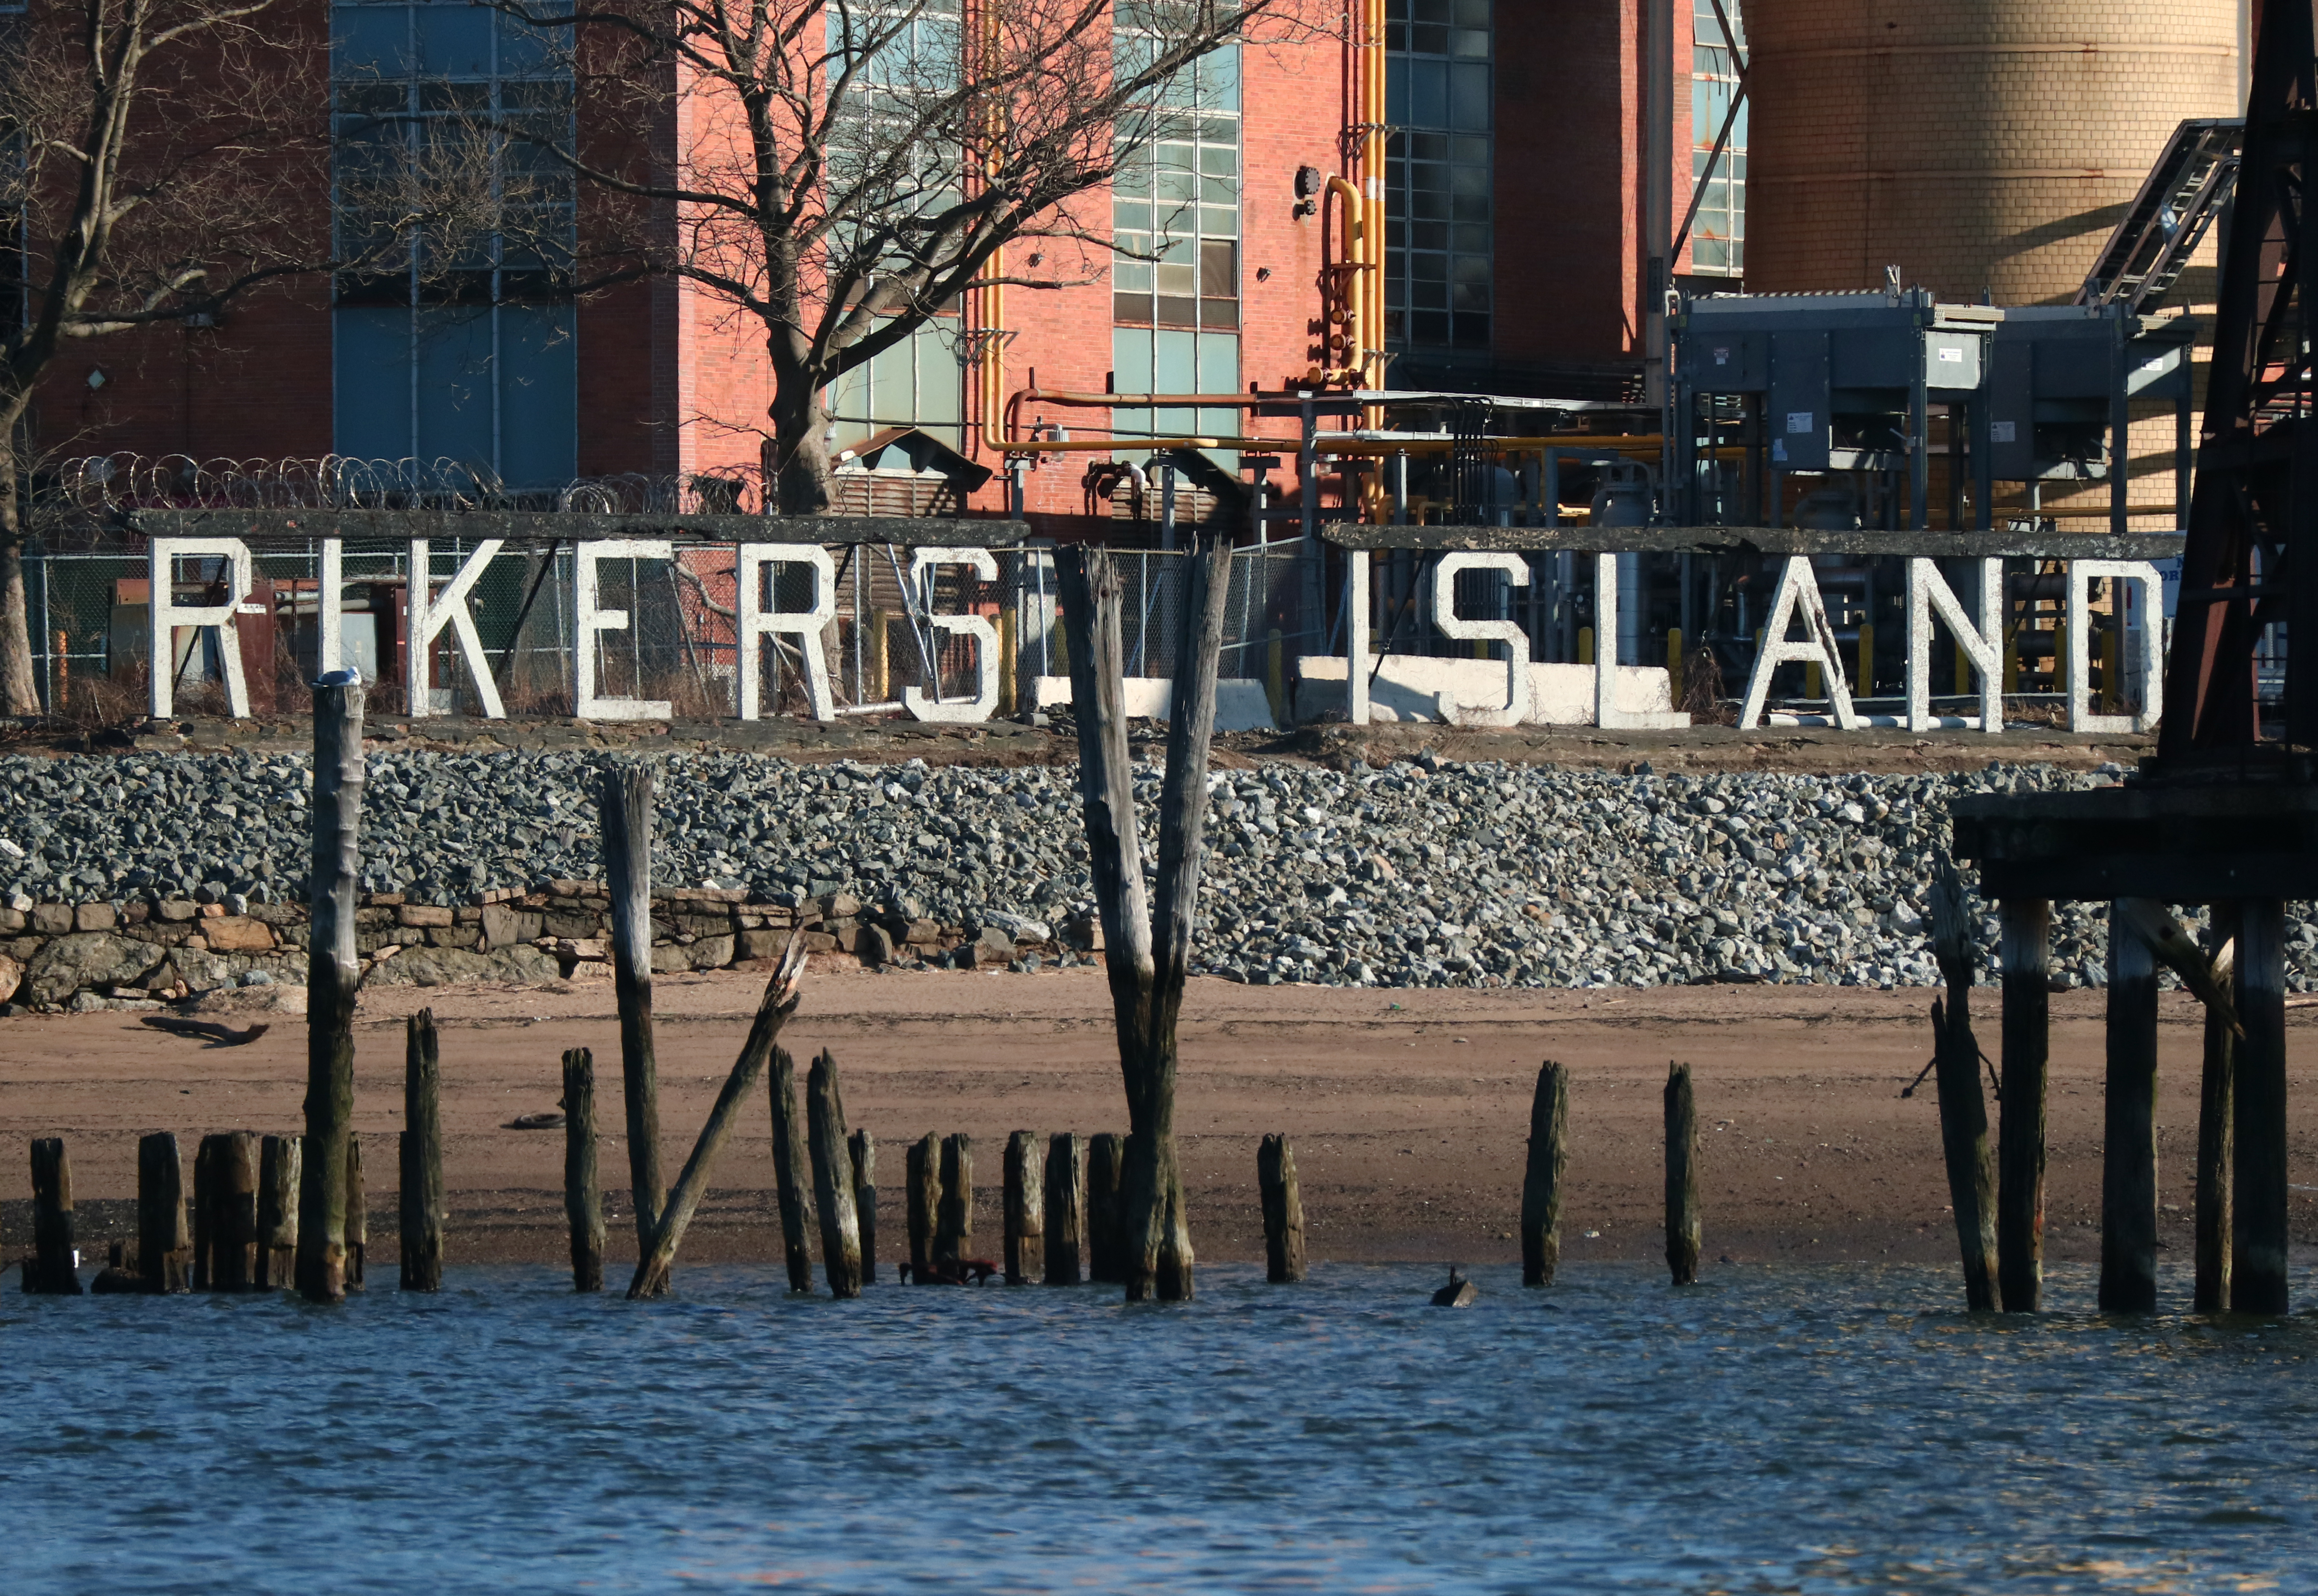 Rikers Correctional Center in New York City: A sign marks the location of the Rikers Correctional Center in the East River on March 9, 2021 in New York City.